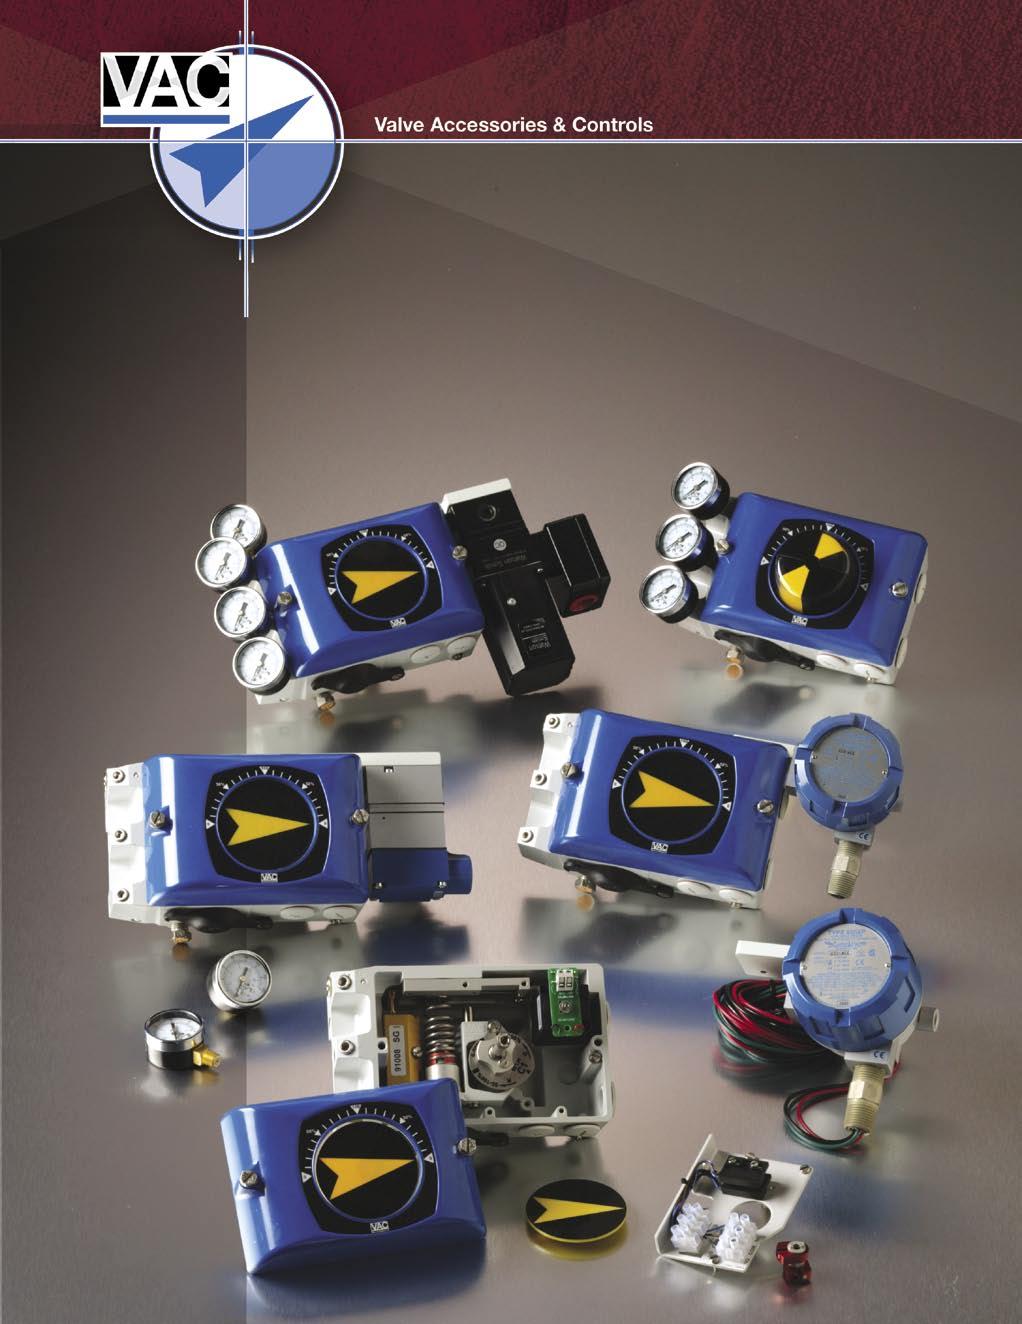 V200 Series Positioners In a single compact and rugged housing The V200 positioner incorporates the flexibility of converting from a pneumatic unit to several versions of an electropneumatic unit,